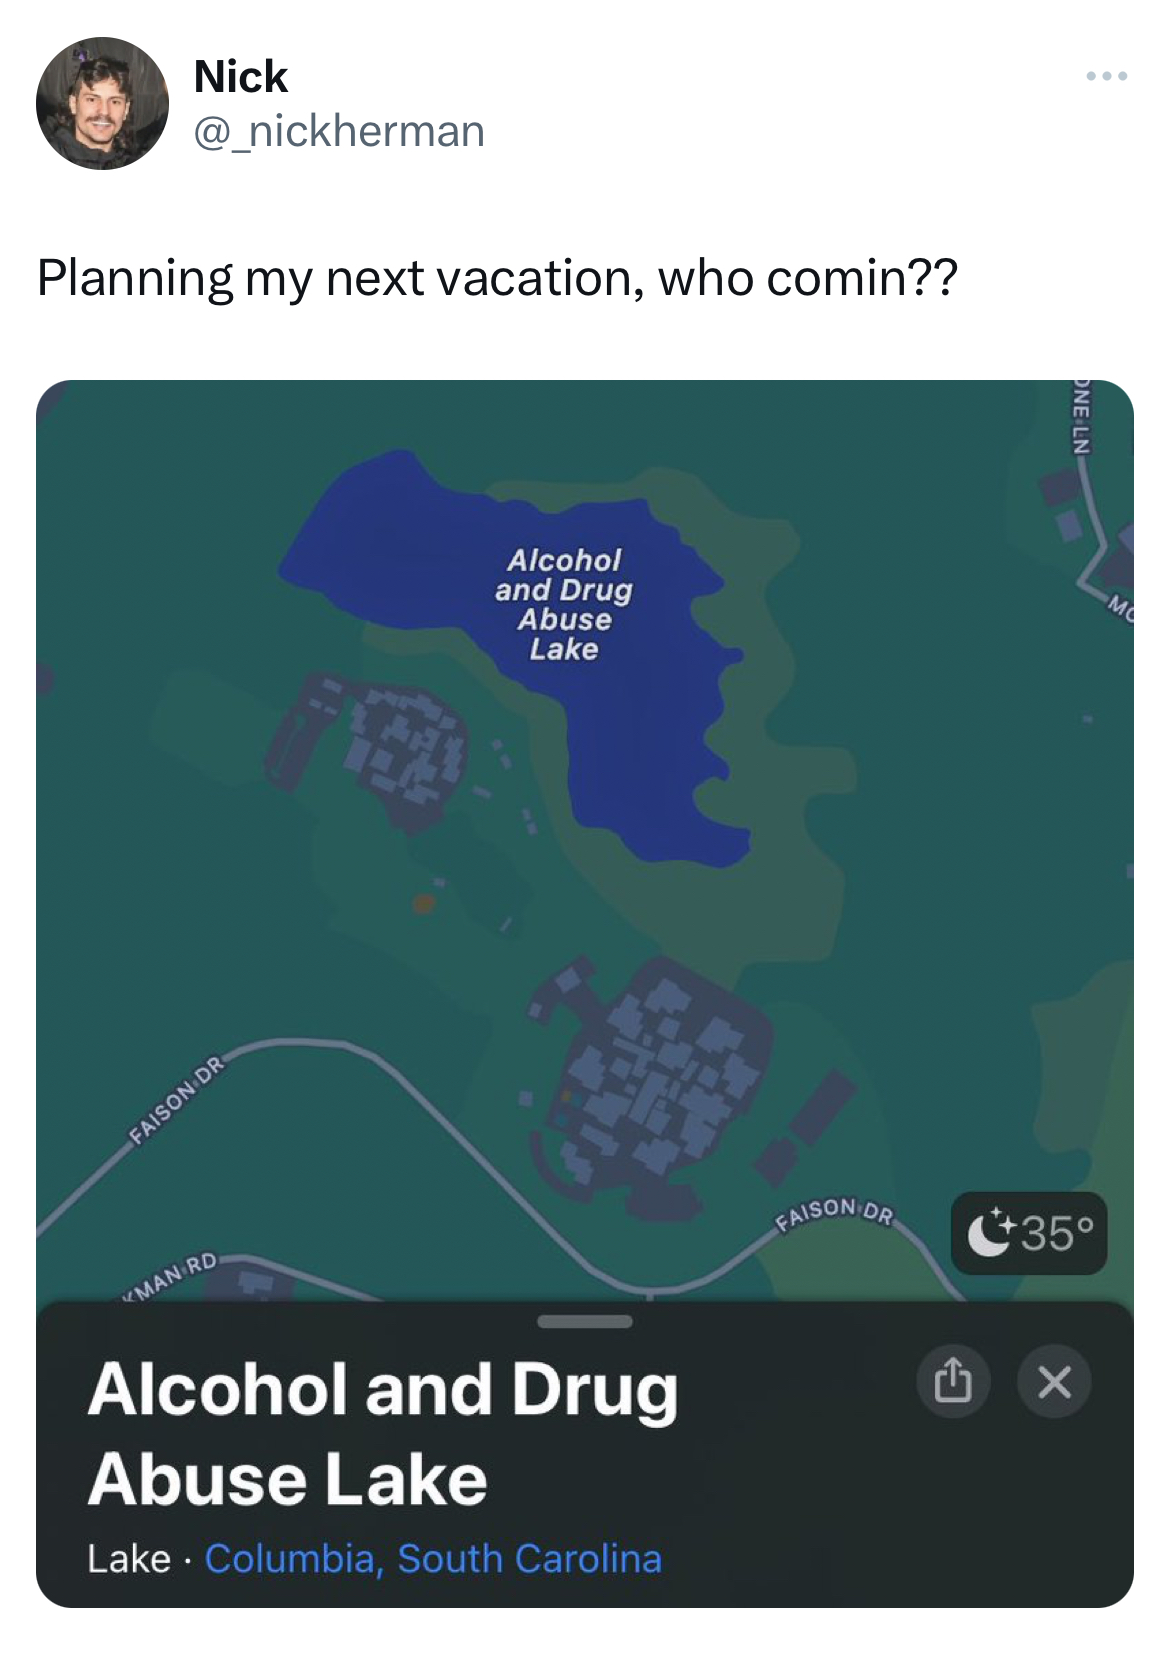 savage tweets - your love is my drug - Nick Planning my next vacation, who comin?? Faison Dr Alcohol and Drug Abuse Lake Alcohol and Drug Abuse Lake Lake Columbia, South Carolina Faison De 35 X